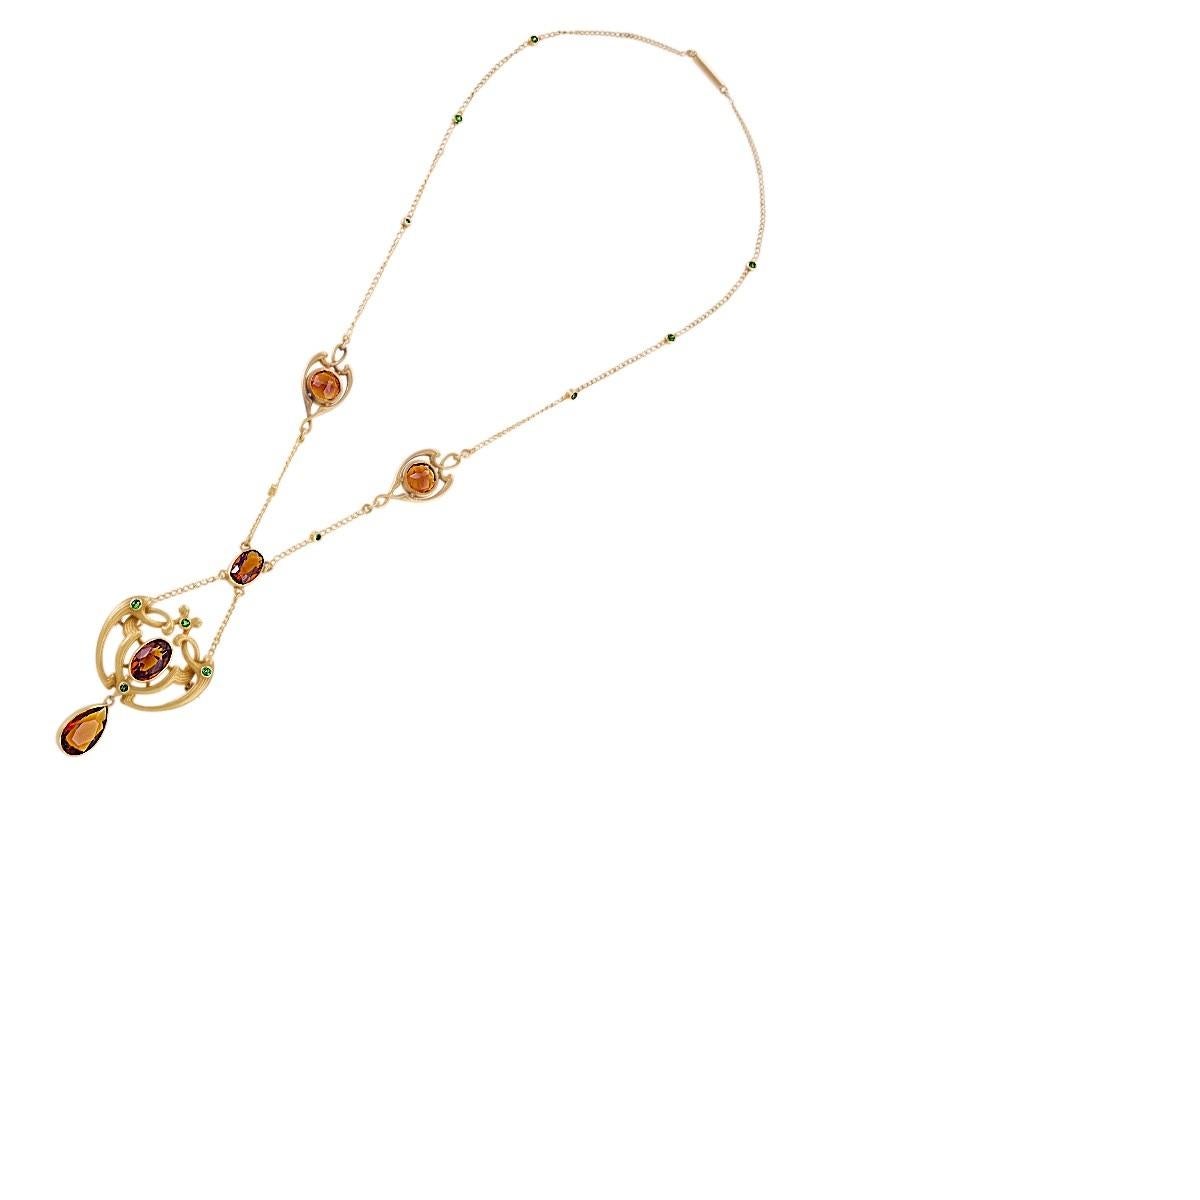 An Art Nouveau 14 karat gold pendant necklace with citrine and demantoid garnet by Bippart, Griscom & Osborn. The tiered necklace is comprised of a chandeliered pendant of intricate and classically Art Nouveau design, centering on an oval citrine